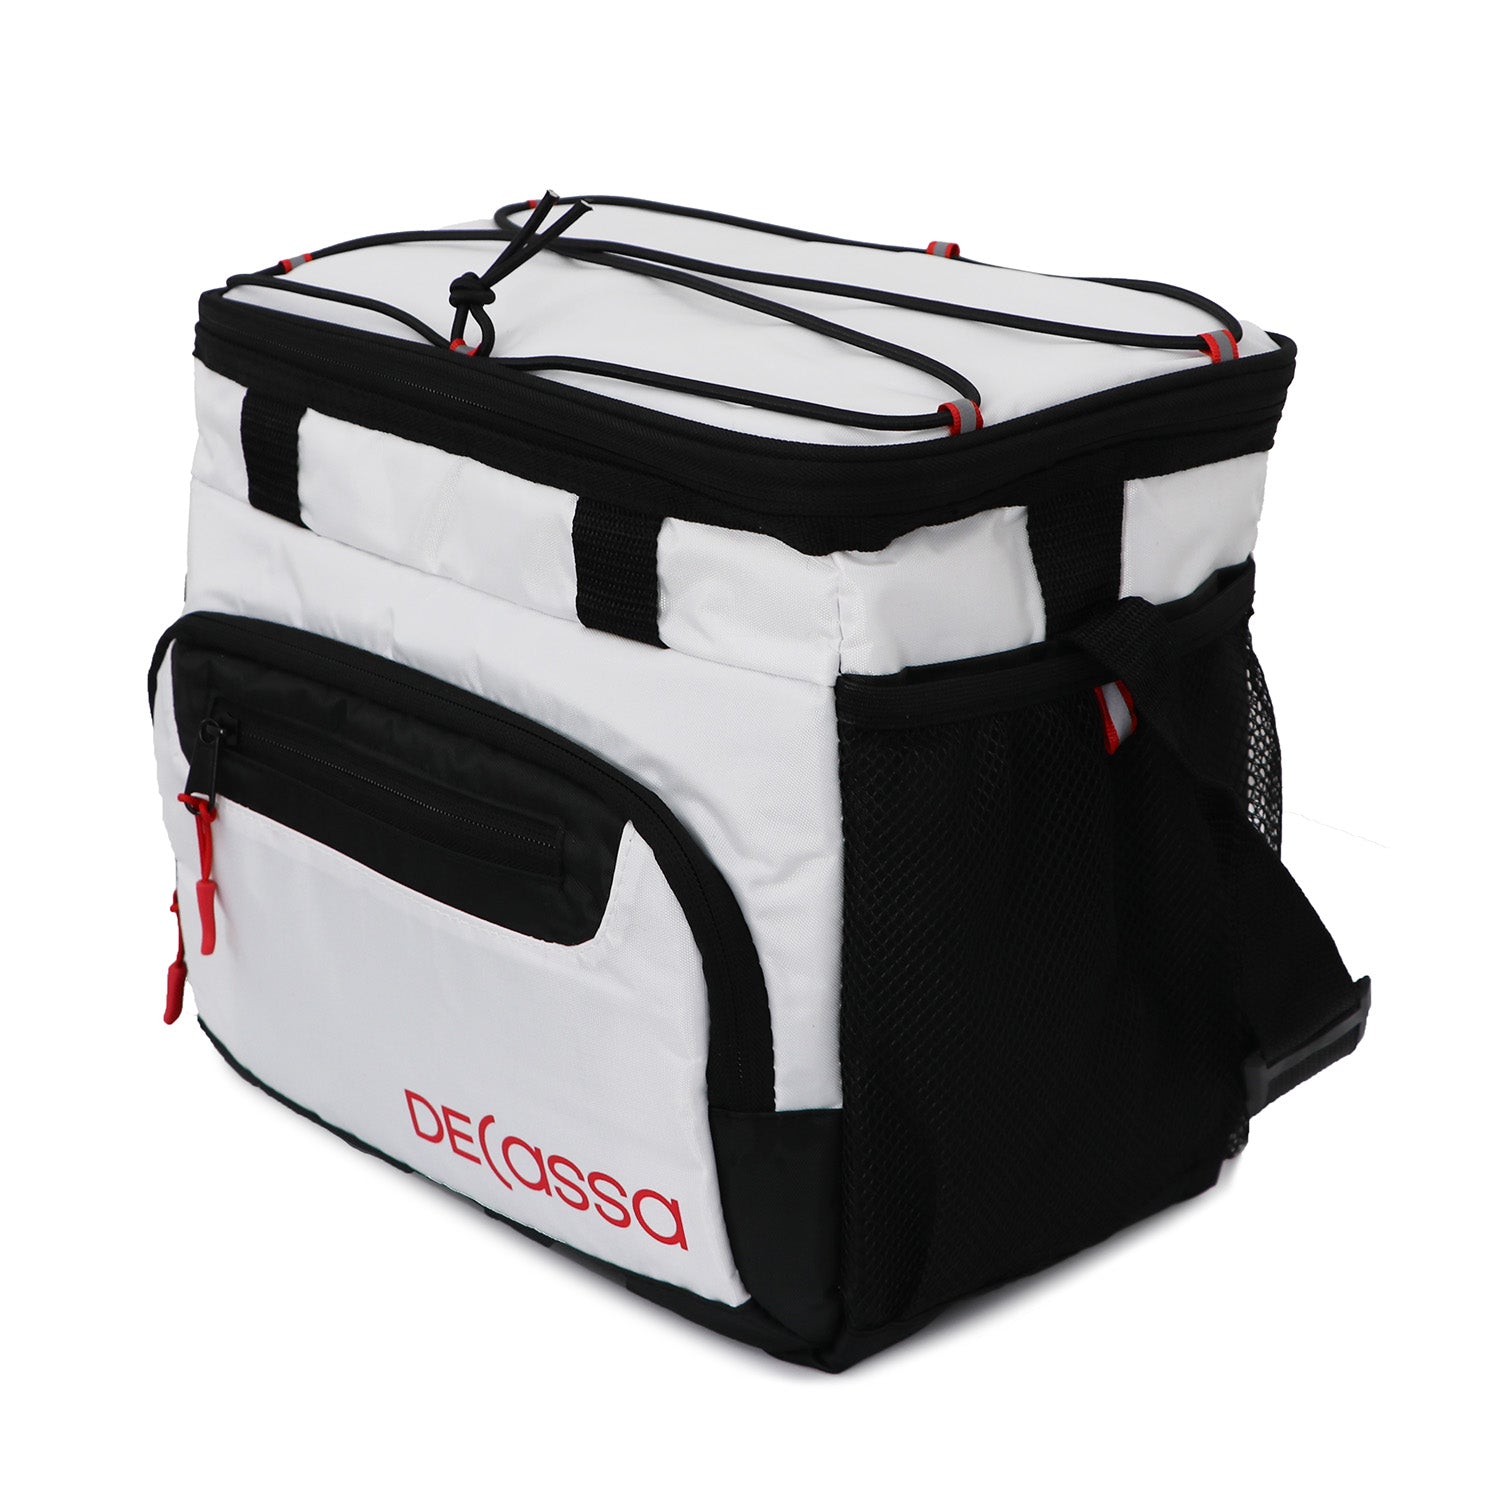 Large Cool Bag with Shoulder Strap Insulated 15L